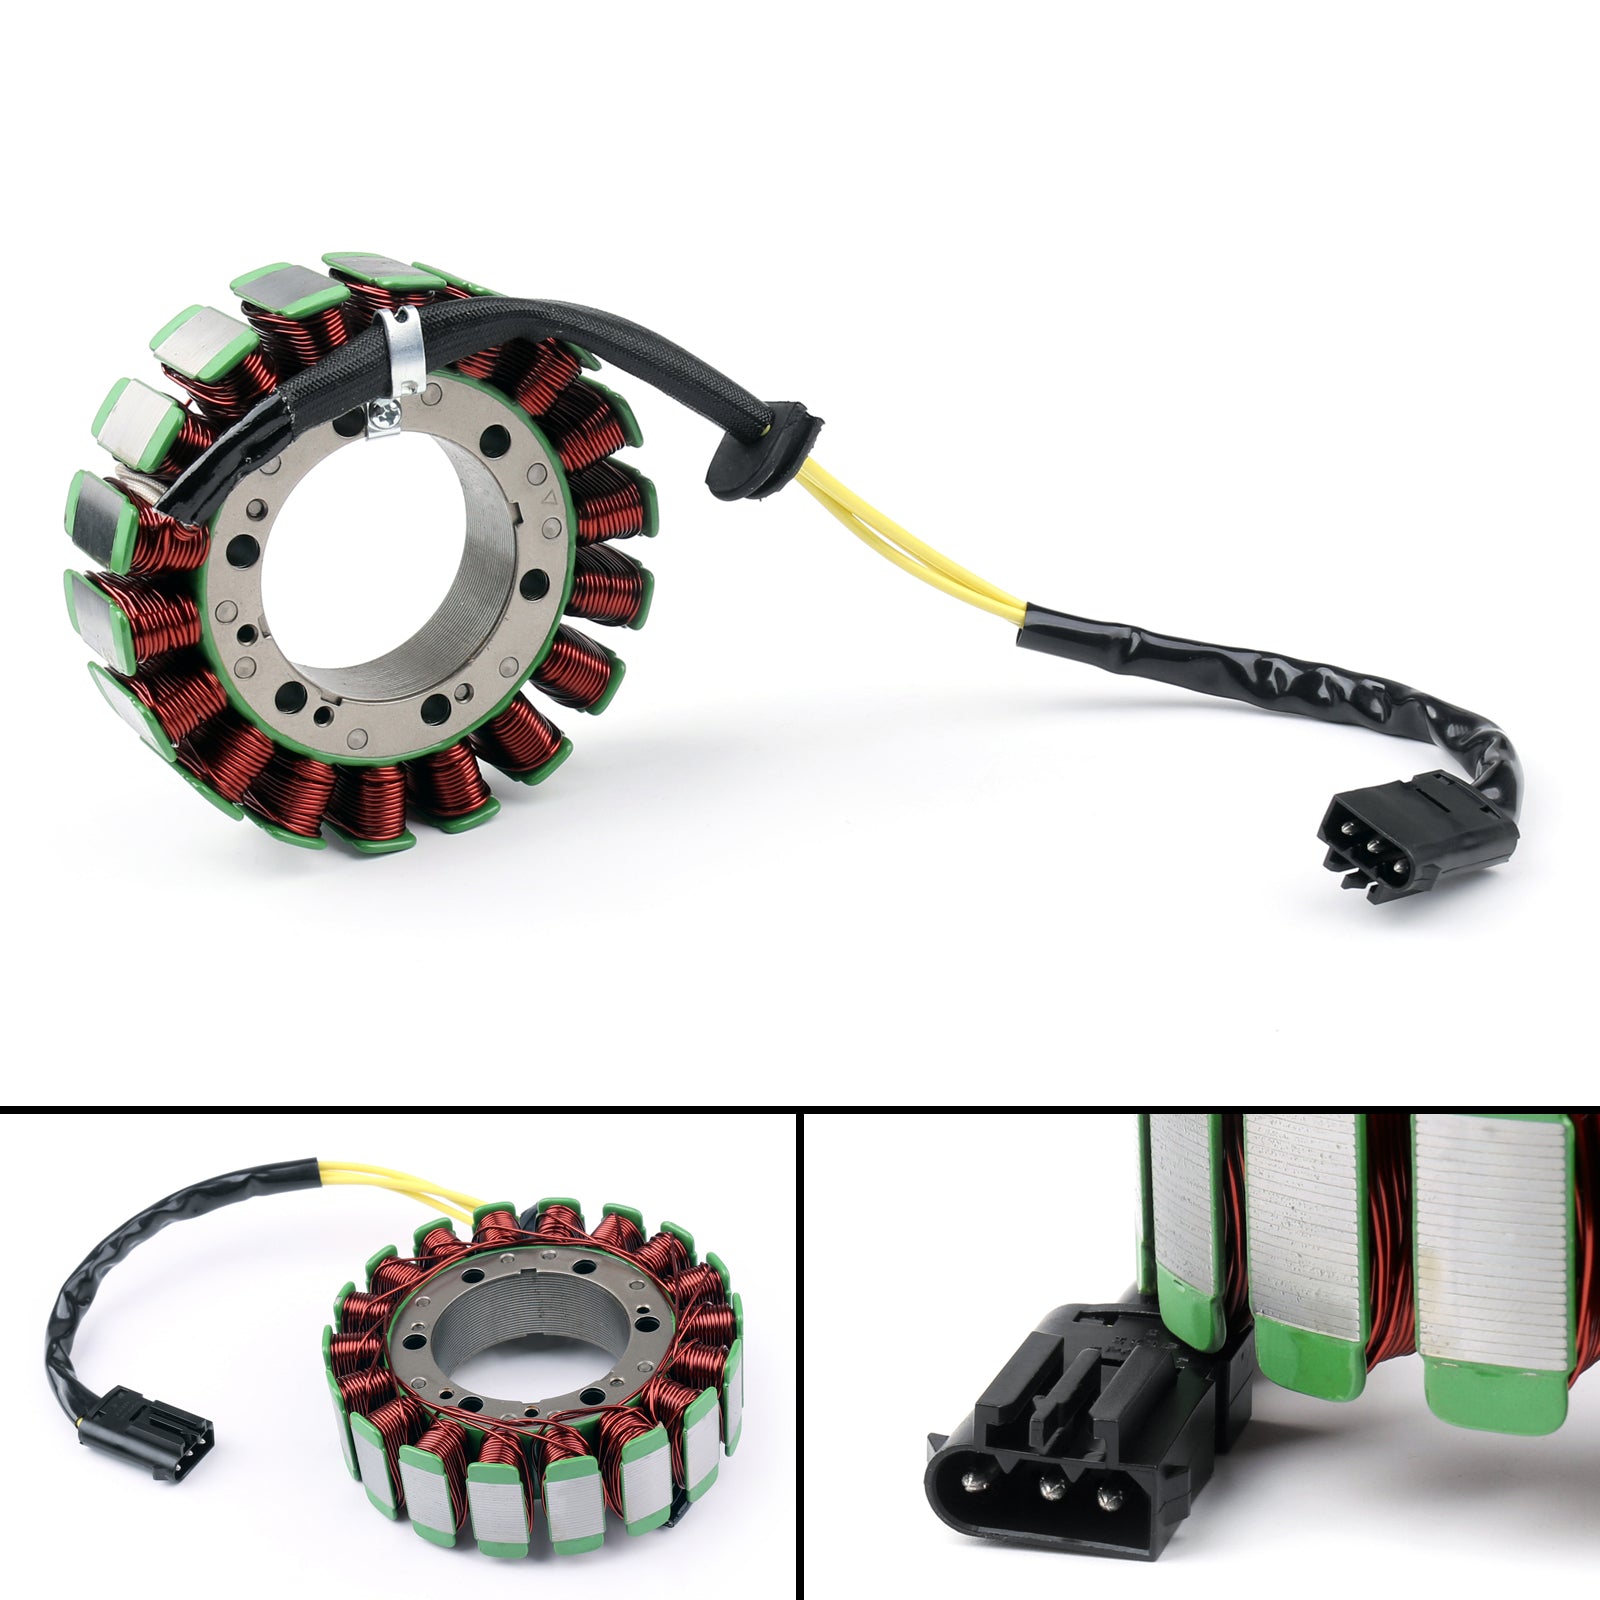 Magneto Generator Stator Coil For BMW G650GS 11-15 F650GS 99-07 F650CS 00-05